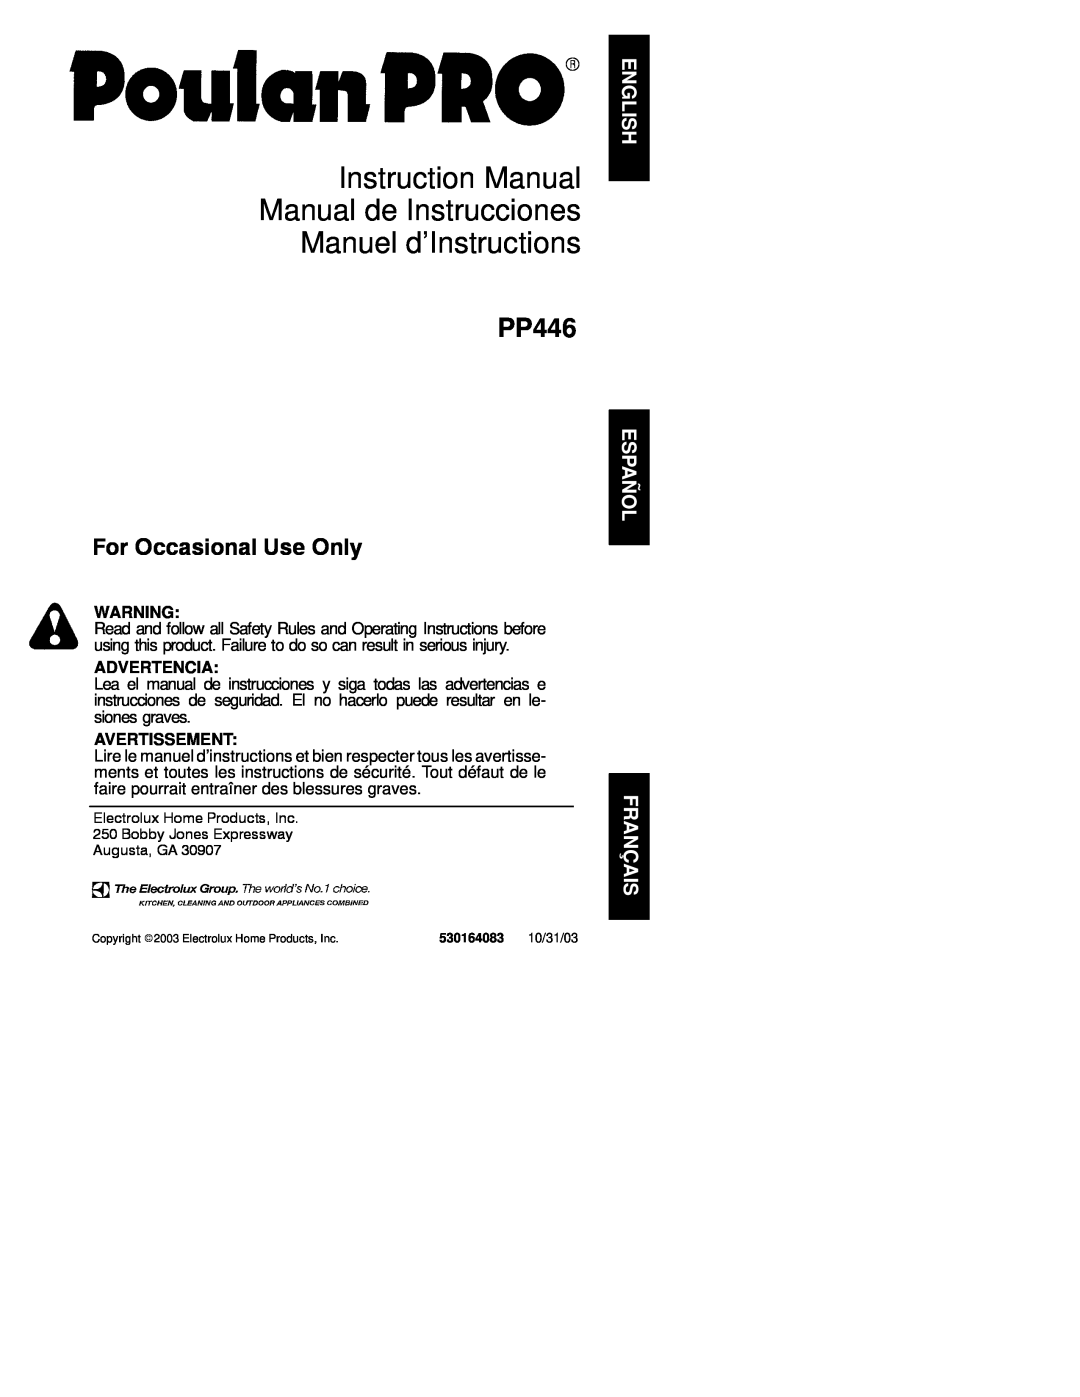 Poulan PP446, 530164083 instruction manual Advertencia, Avertissement, For Occasional Use Only 